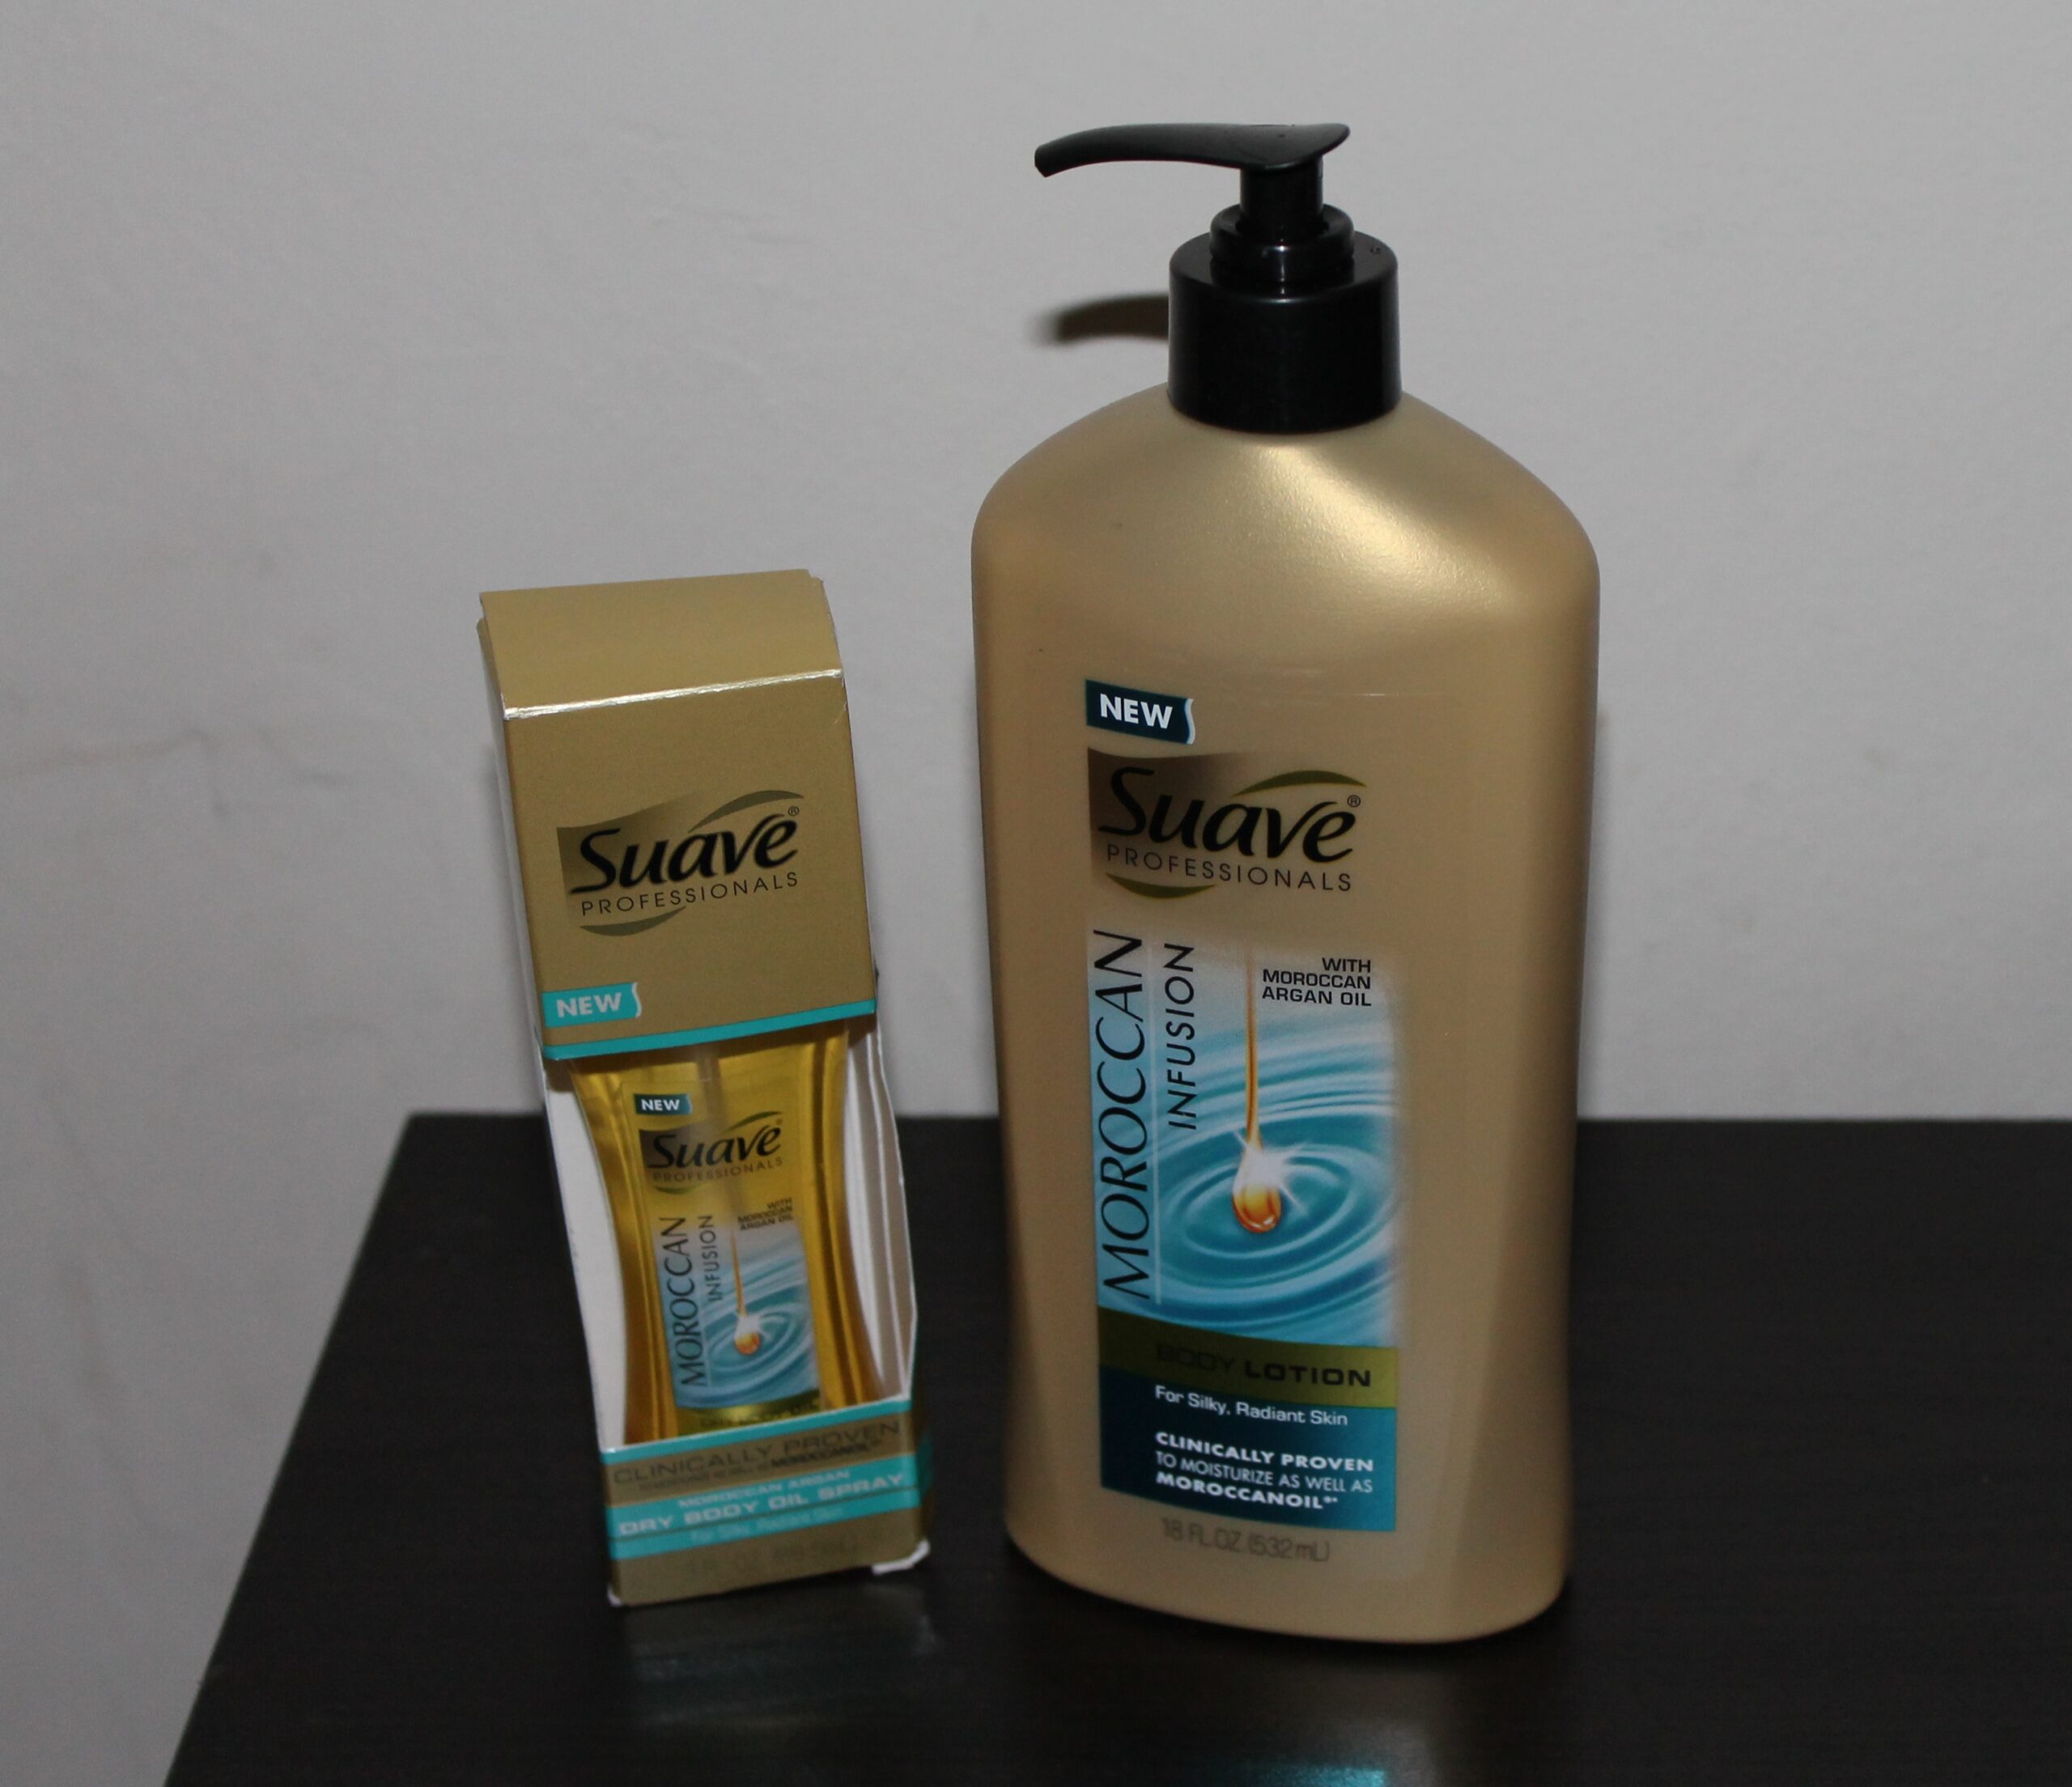 Suave Professionals® Moroccan Infusion Body Care Review + a Chance to Win a $1000 Gift Card